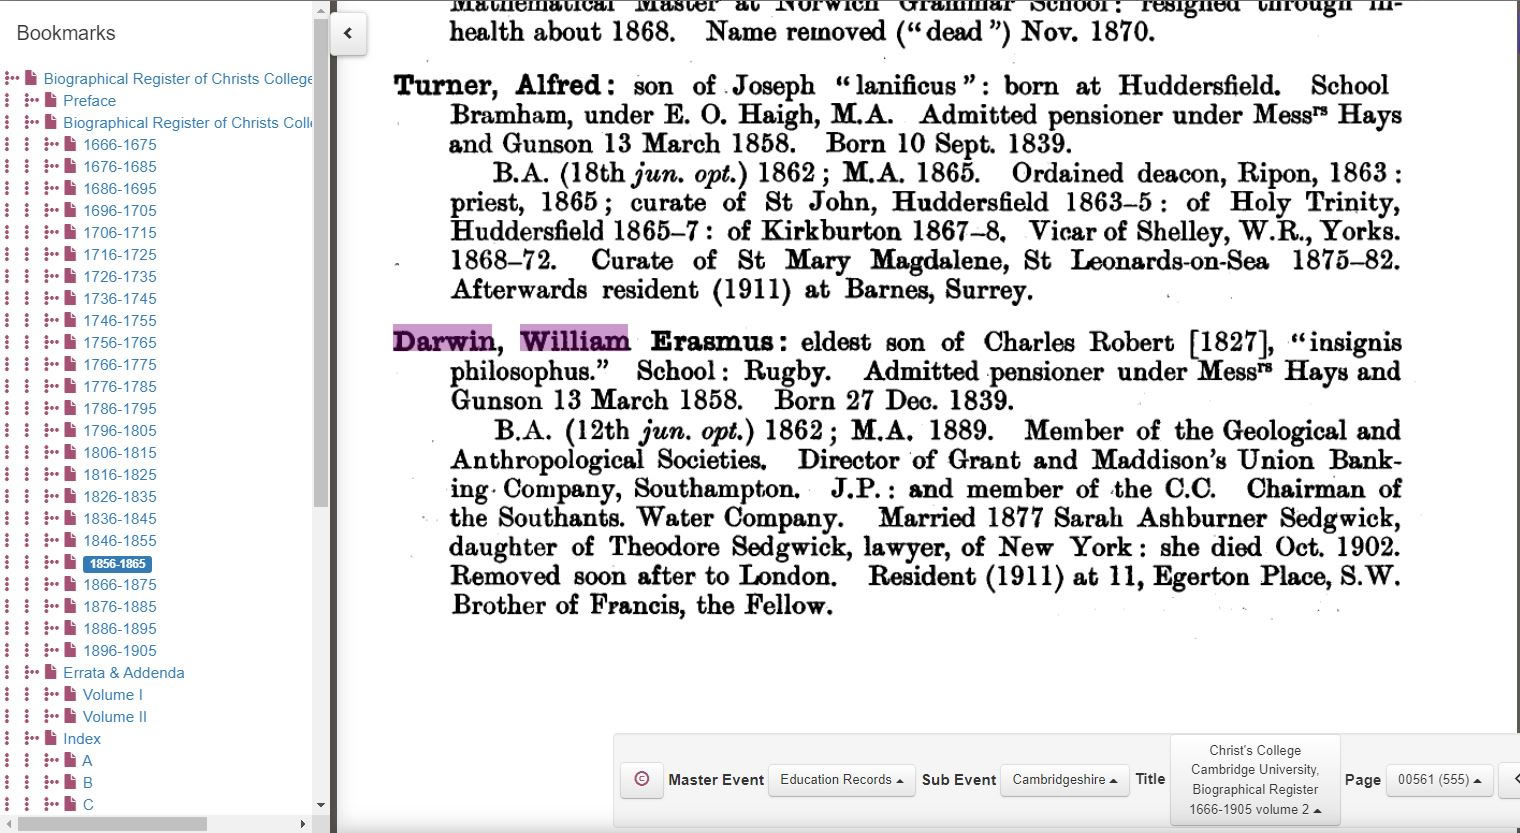 Educational records on TheGenealogist give biographical details that can be used to flesh out a person's story